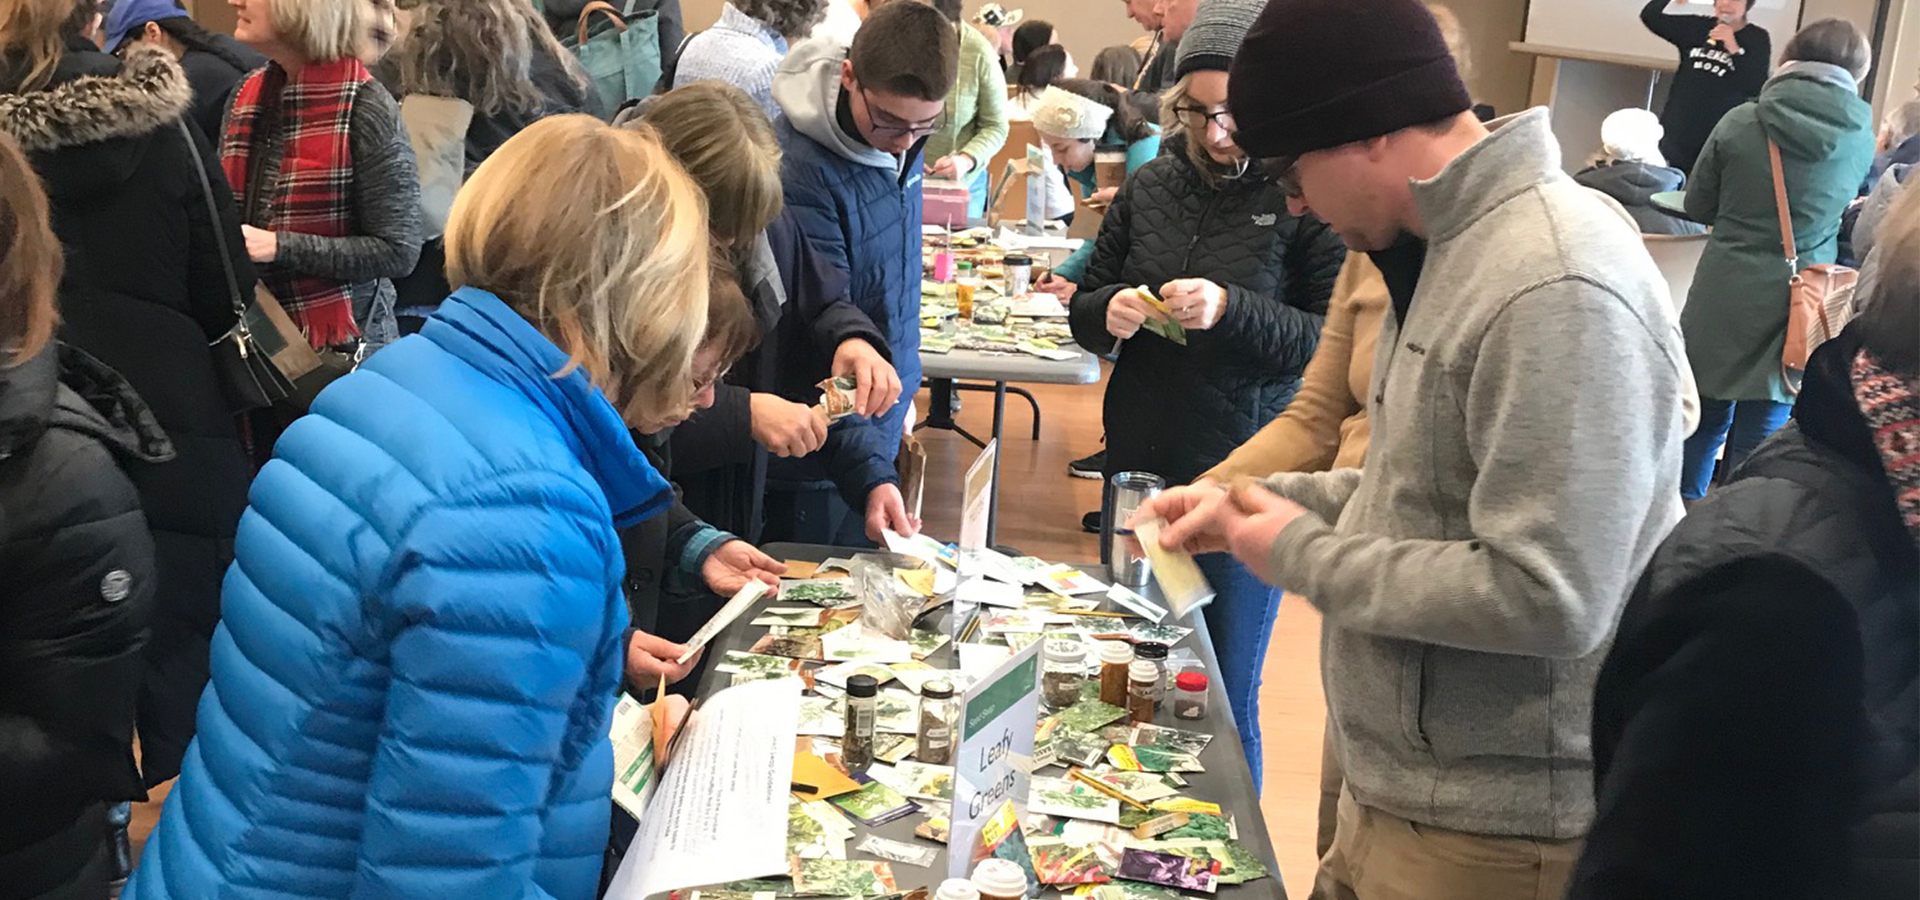 People crowded around a table containing seeds for leafy greens at a seed swap event.